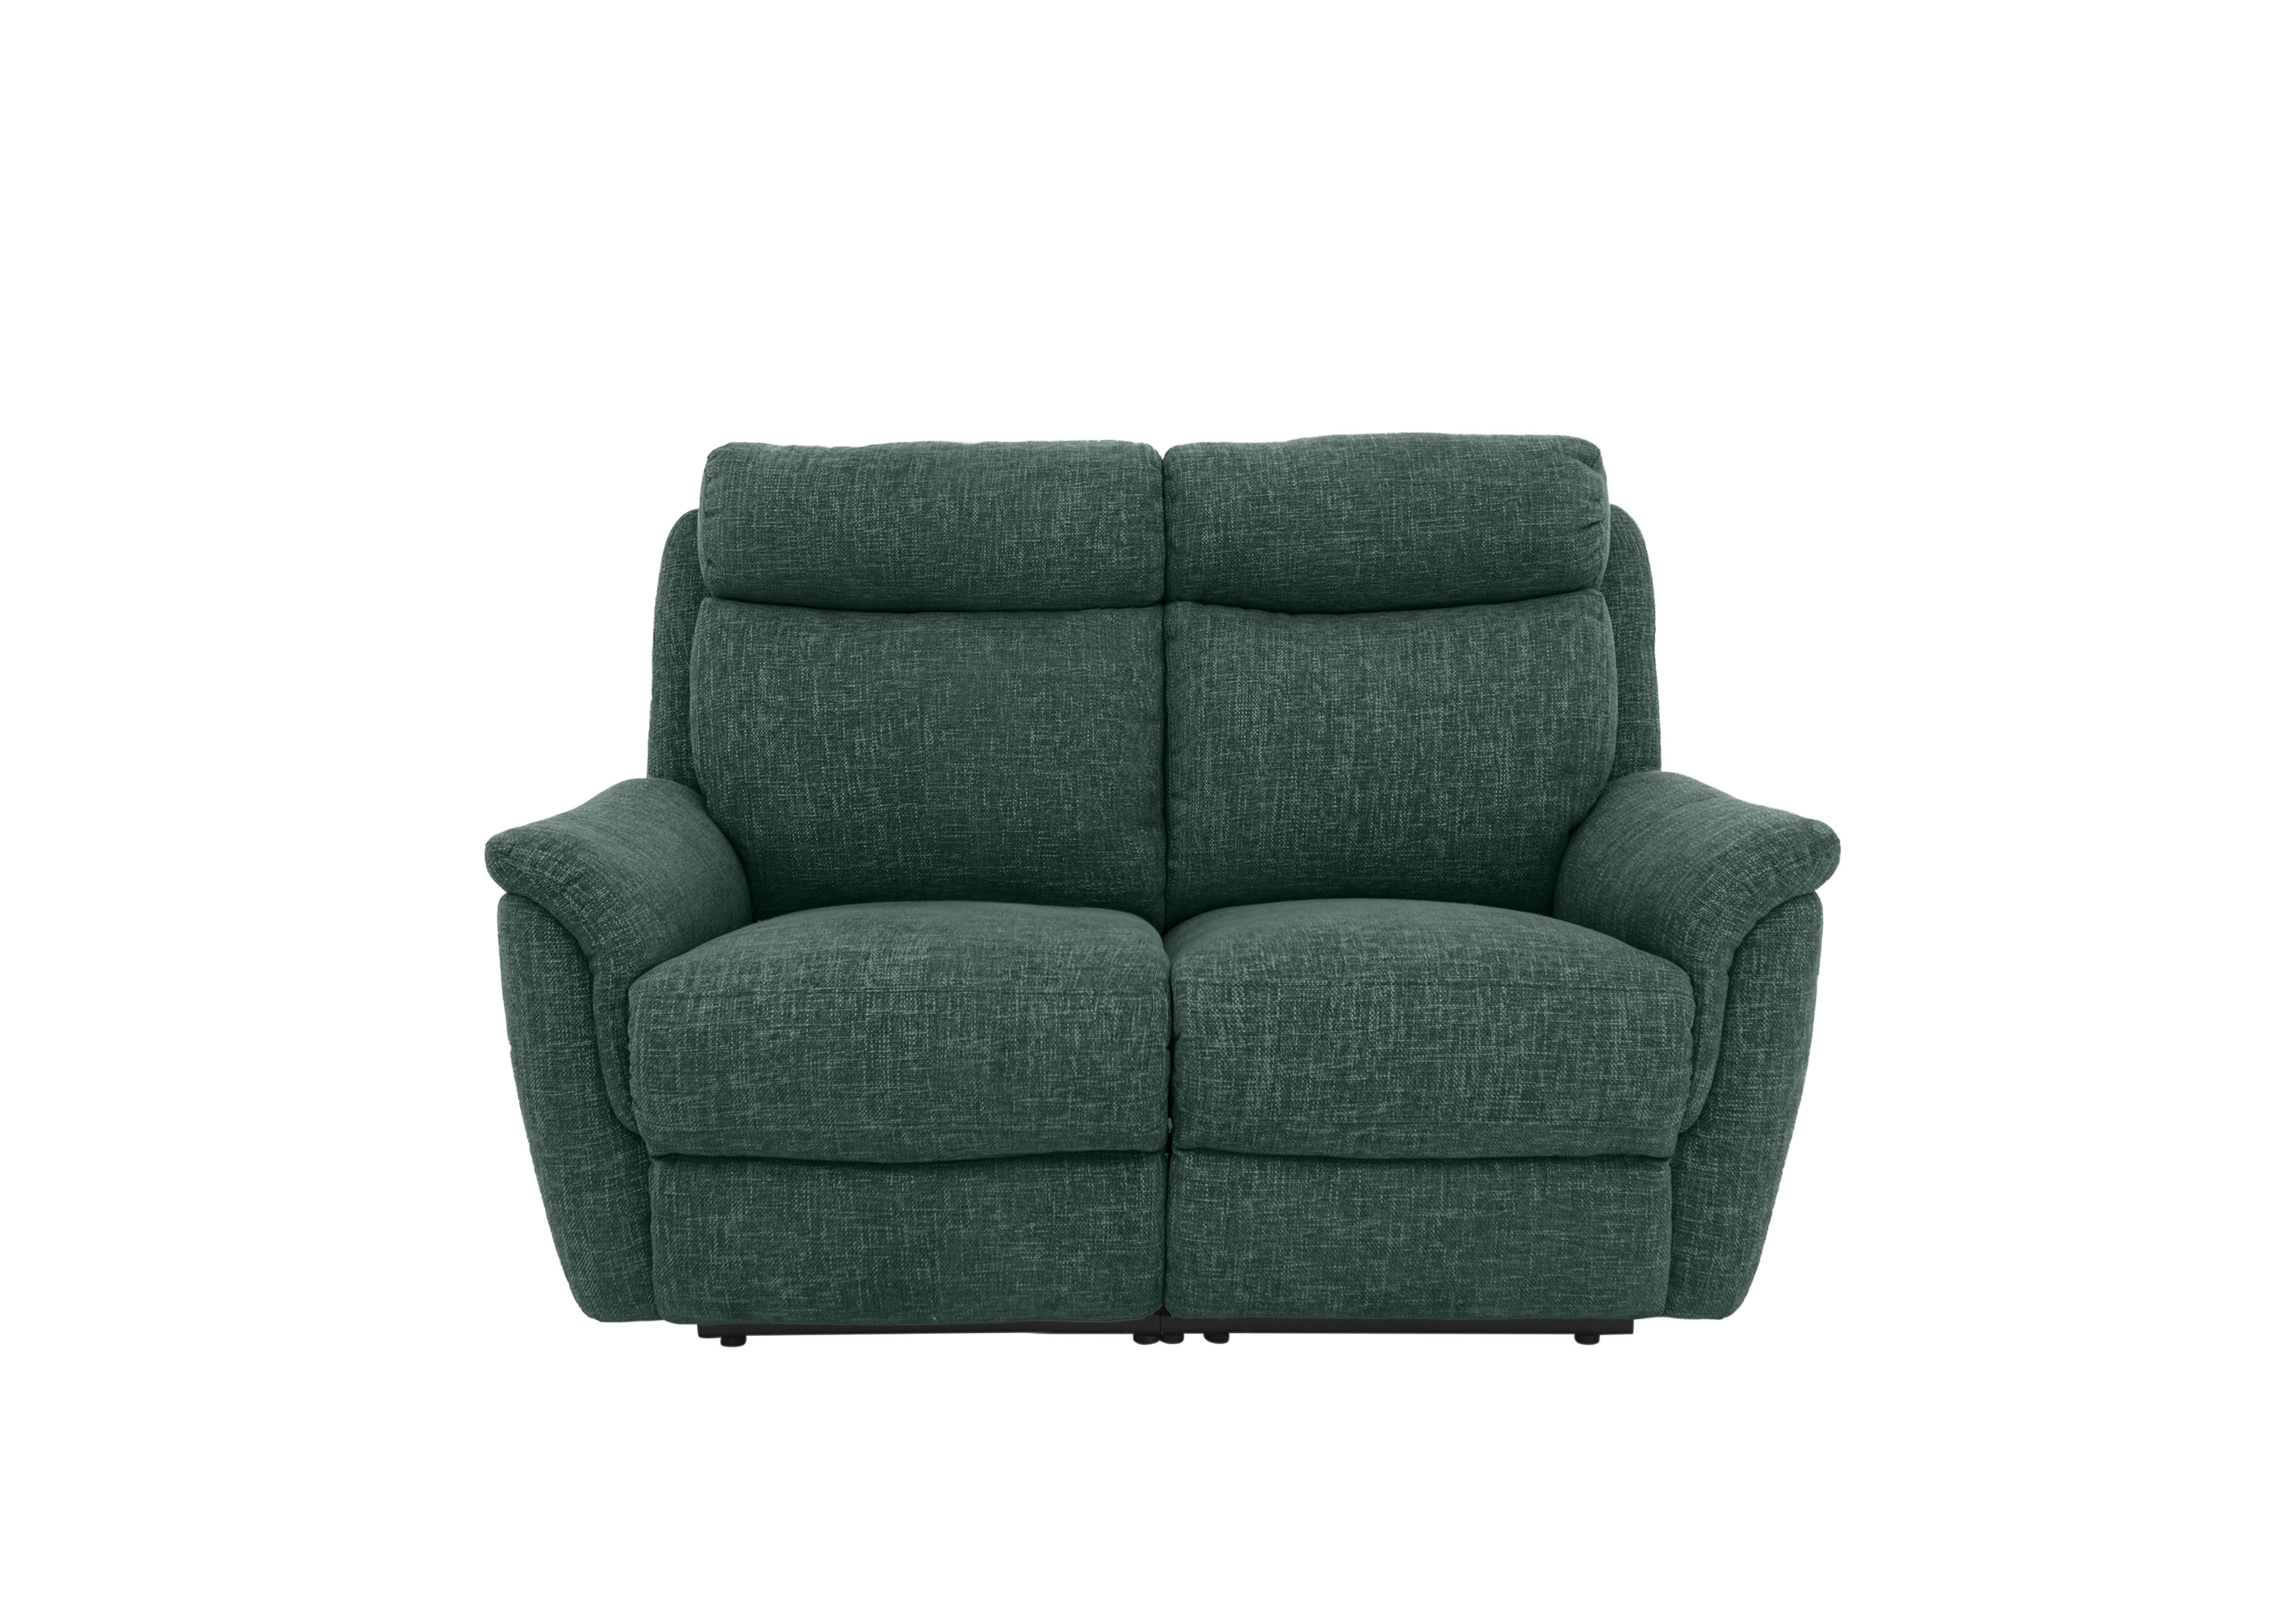 Orlando 2 Seater Fabric Power Recliner Sofa with Power Headrests and Lumbar Support in Anivia Green 19445 on Furniture Village